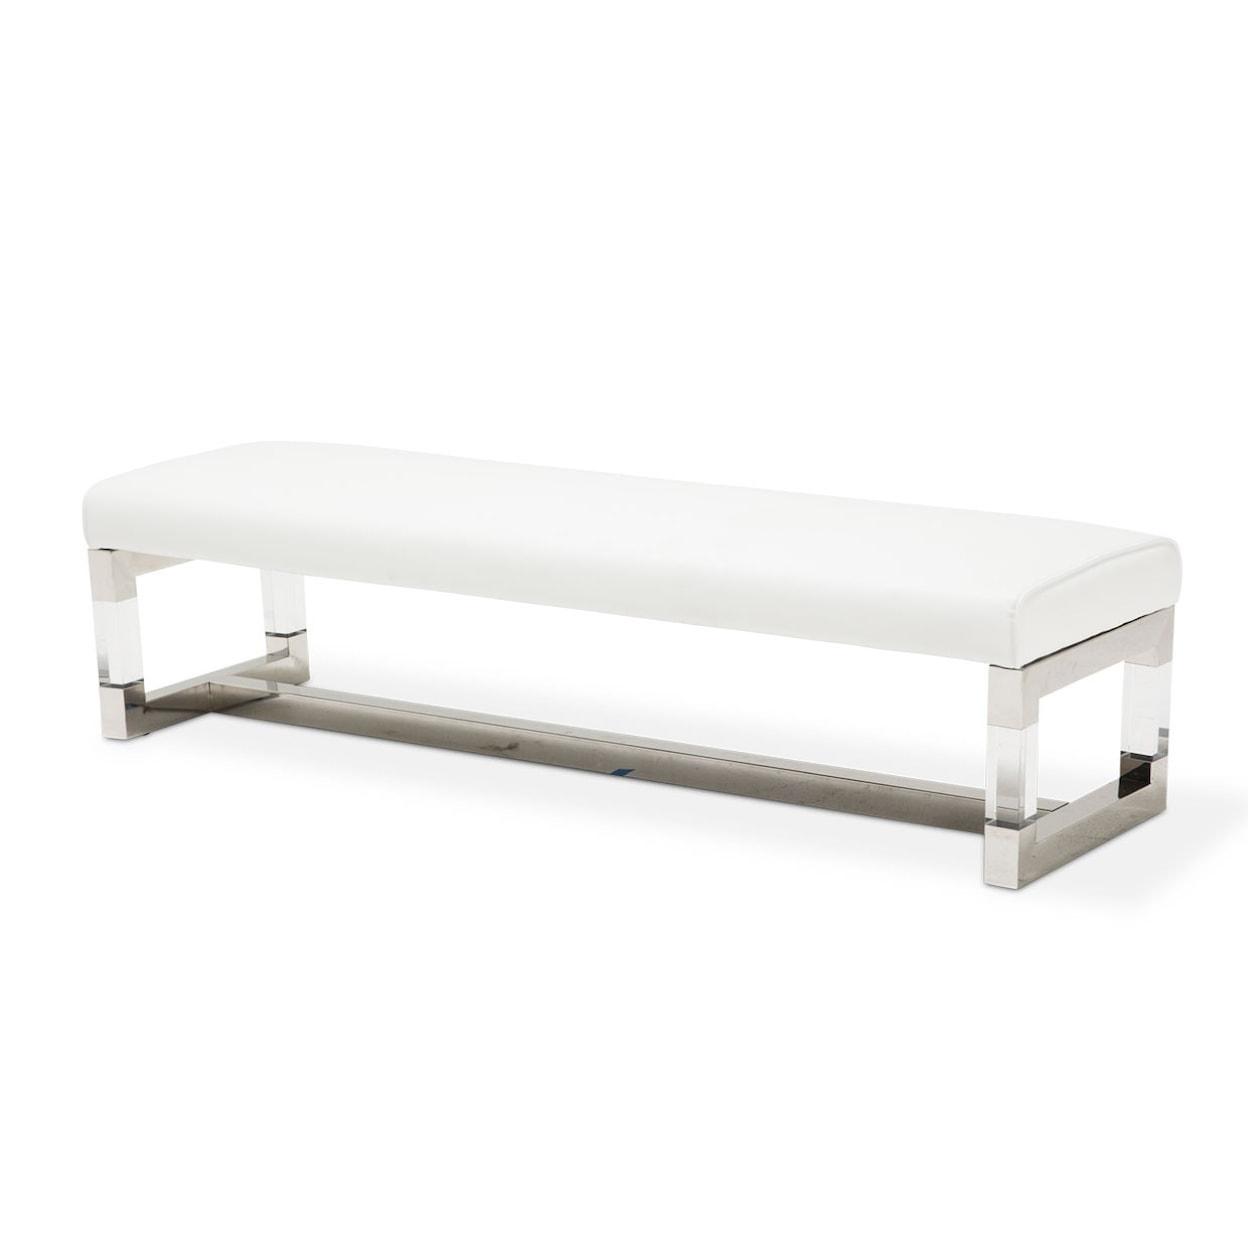 Michael Amini State St. Bed Bench